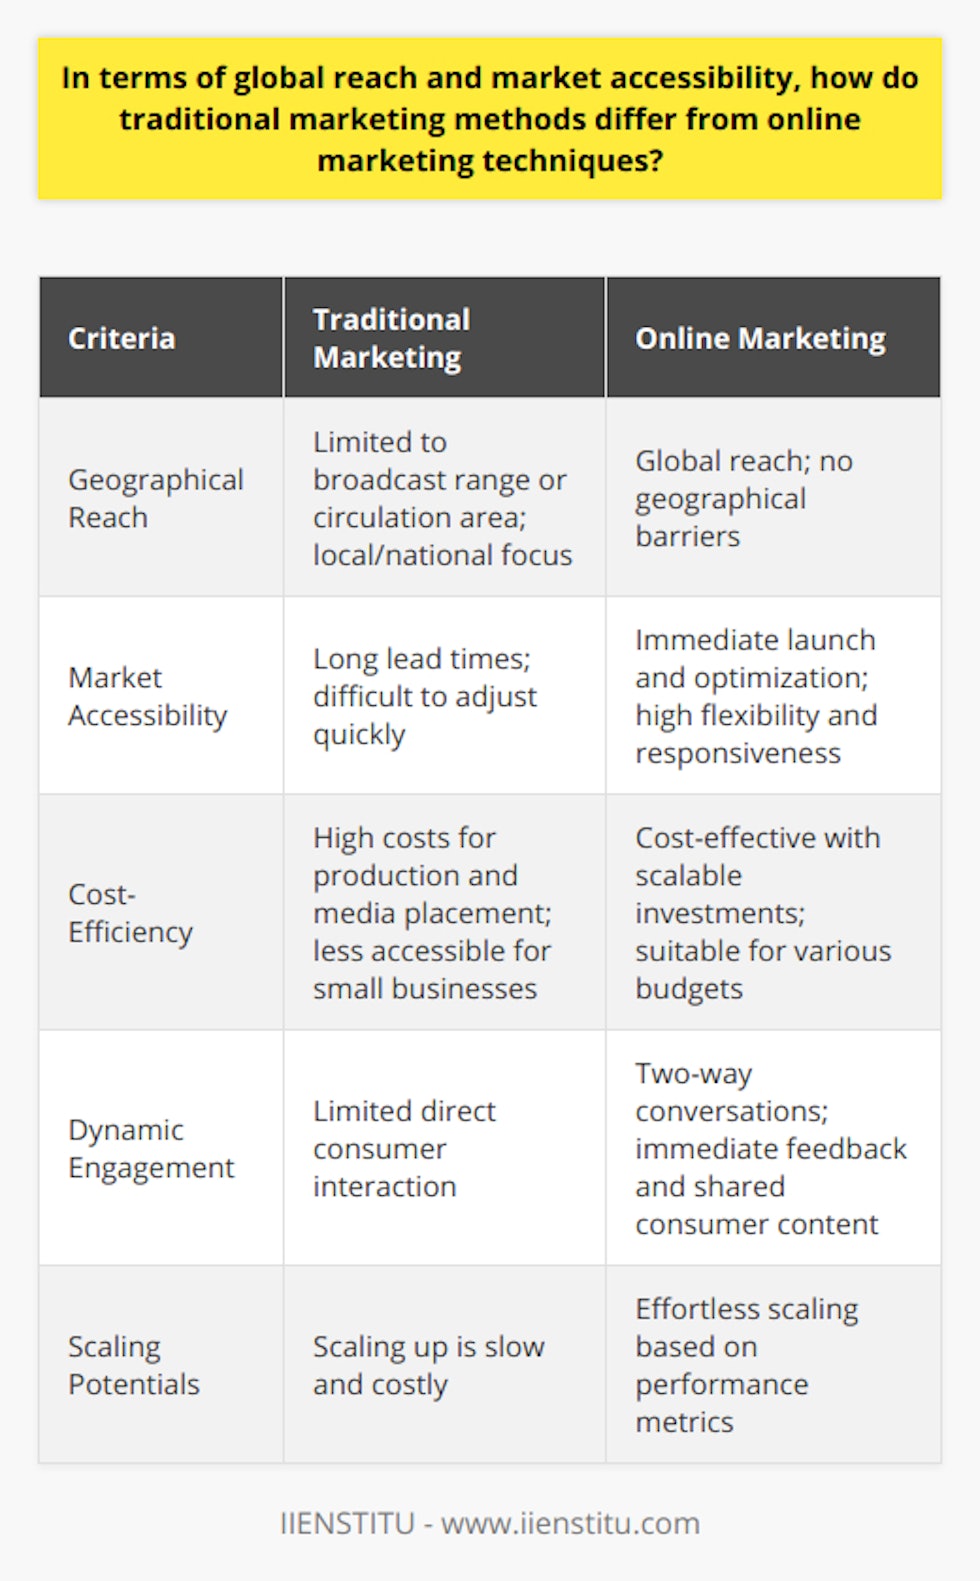 The landscape of marketing has vastly evolved over the past couple of decades, with traditional methods and online marketing techniques adopting divergent pathways in terms of how they approach global reach and market accessibility.Geographical Reach:Traditional marketing, historically a cornerstone of business outreach, includes tactics like print ads in newspapers or magazines, billboards, television commercials, and radio spots. These methods are physically and regionally constricted, operating within the bounds of their broadcast range or circulation area. This inherent limitation restricts a campaign's visibility to the local or national locales that the respective media can cover.On the counter side, online marketing shatters geographical barriers. The digital sphere has no borders; hence, a small startup using online platforms can, in principle, tap into markets as widespread as those accessible to multinational corporations. Search engine optimization (SEO), pay-per-click (PPC) advertising, and social media campaigns facilitate a presence that crosses oceans and continents, reaching any corner of the globe where there is internet connectivity.Market Accessibility:Traditional marketing channels often necessitate substantial lead times for production and distribution. Printing materials, preparing broadcast copy, and negotiating media placements can prolong the process from conception to execution. Furthermore, adjusting or scaling these campaigns swiftly in response to market feedback can be cumbersome and sometimes impractical.Conversely, online marketing, through platforms such as IIENSTITU, not only crosses physical boundaries with ease but also offers unparalleled agility. Campaigns can be launched, analyzed, adjusted, and optimized in near real-time, permitting a responsive and flexible marketing approach. This nimbleness allows businesses to capitalize on trends, respond to consumer behaviors, and manage resources more effectively, offering immediate access to markets that were once considered out of reach for many.Cost-Efficiency:On the subject of resource management, cost-efficiency is a discernable divergence between traditional and online marketing methods. Investing in traditional media can be costly, with prices fixed by circulation, reach or time slots, and costs associated with production. While these campaigns can be impactful, the financial barrier to entry is often high.In stark contrast, online marketing provides cost-effective solutions that cater to a broad range of budgets. Platforms operating on a pay-per-engagement or pay-per-click model mean that businesses can structure campaigns to suit their expenditure capabilities. This flexibility extends to scaling – businesses only invest more when they see quantifiable results, making it an efficient use of marketing dollars.Dynamic Engagement:Finally, the shift towards online marketing is heavily influenced by the dynamic nature of engagement it offers. Platforms facilitate two-way conversations, enabling consumers to interact, share, and provide feedback instantly. This consumer engagement is not only fundamental for building relationships but also vital for gleaning actionable insights into customer preferences and behaviors.In conclusion, when comparing traditional marketing methods with online marketing techniques, the differences in geographical reach, market accessibility, cost-efficiency, and dynamic engagement become vividly clear. Online marketing's ability to transcend physical boundaries, operate with immediacy, offer budget-friendly options, and interact with consumers on a personal level presents a paradigm shift in how businesses approach their marketing strategies in the global marketplace.